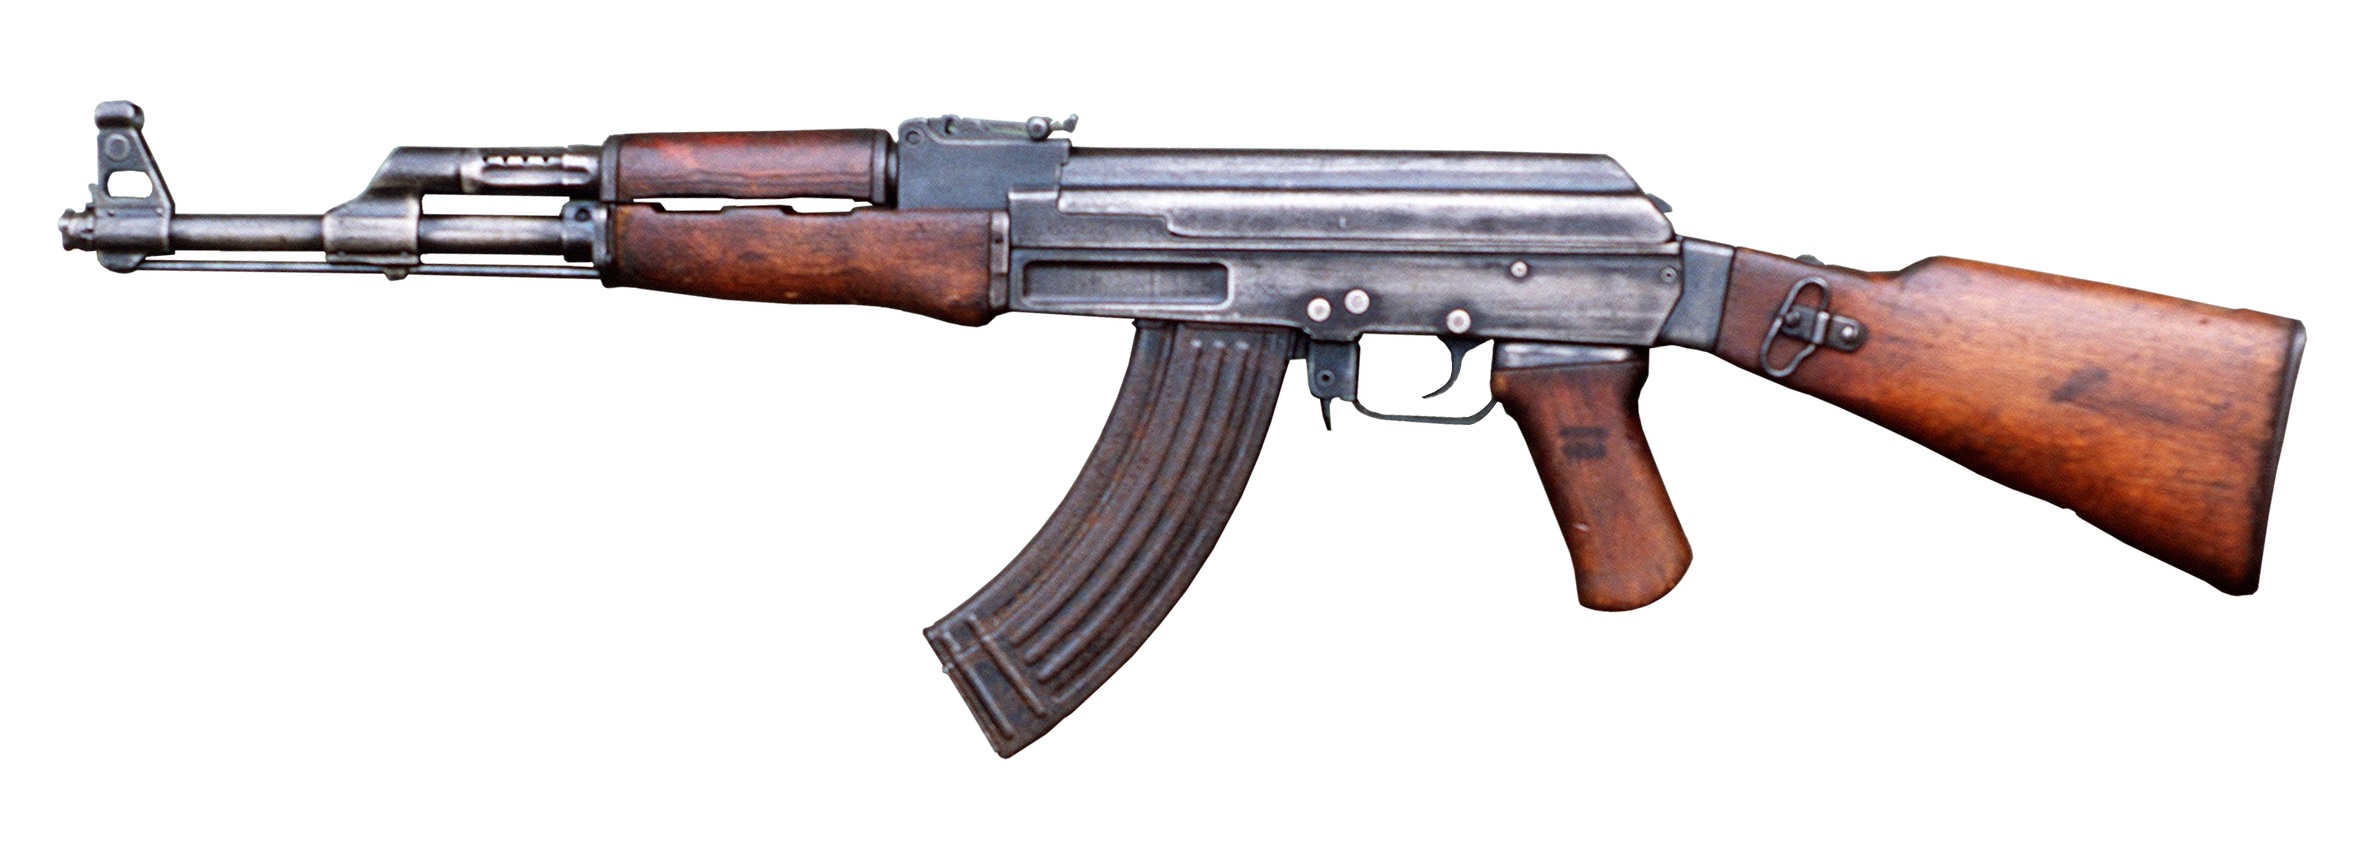 Russia Knows The Trick To Making An Accurate Fully Automatic Rifle The National Interest